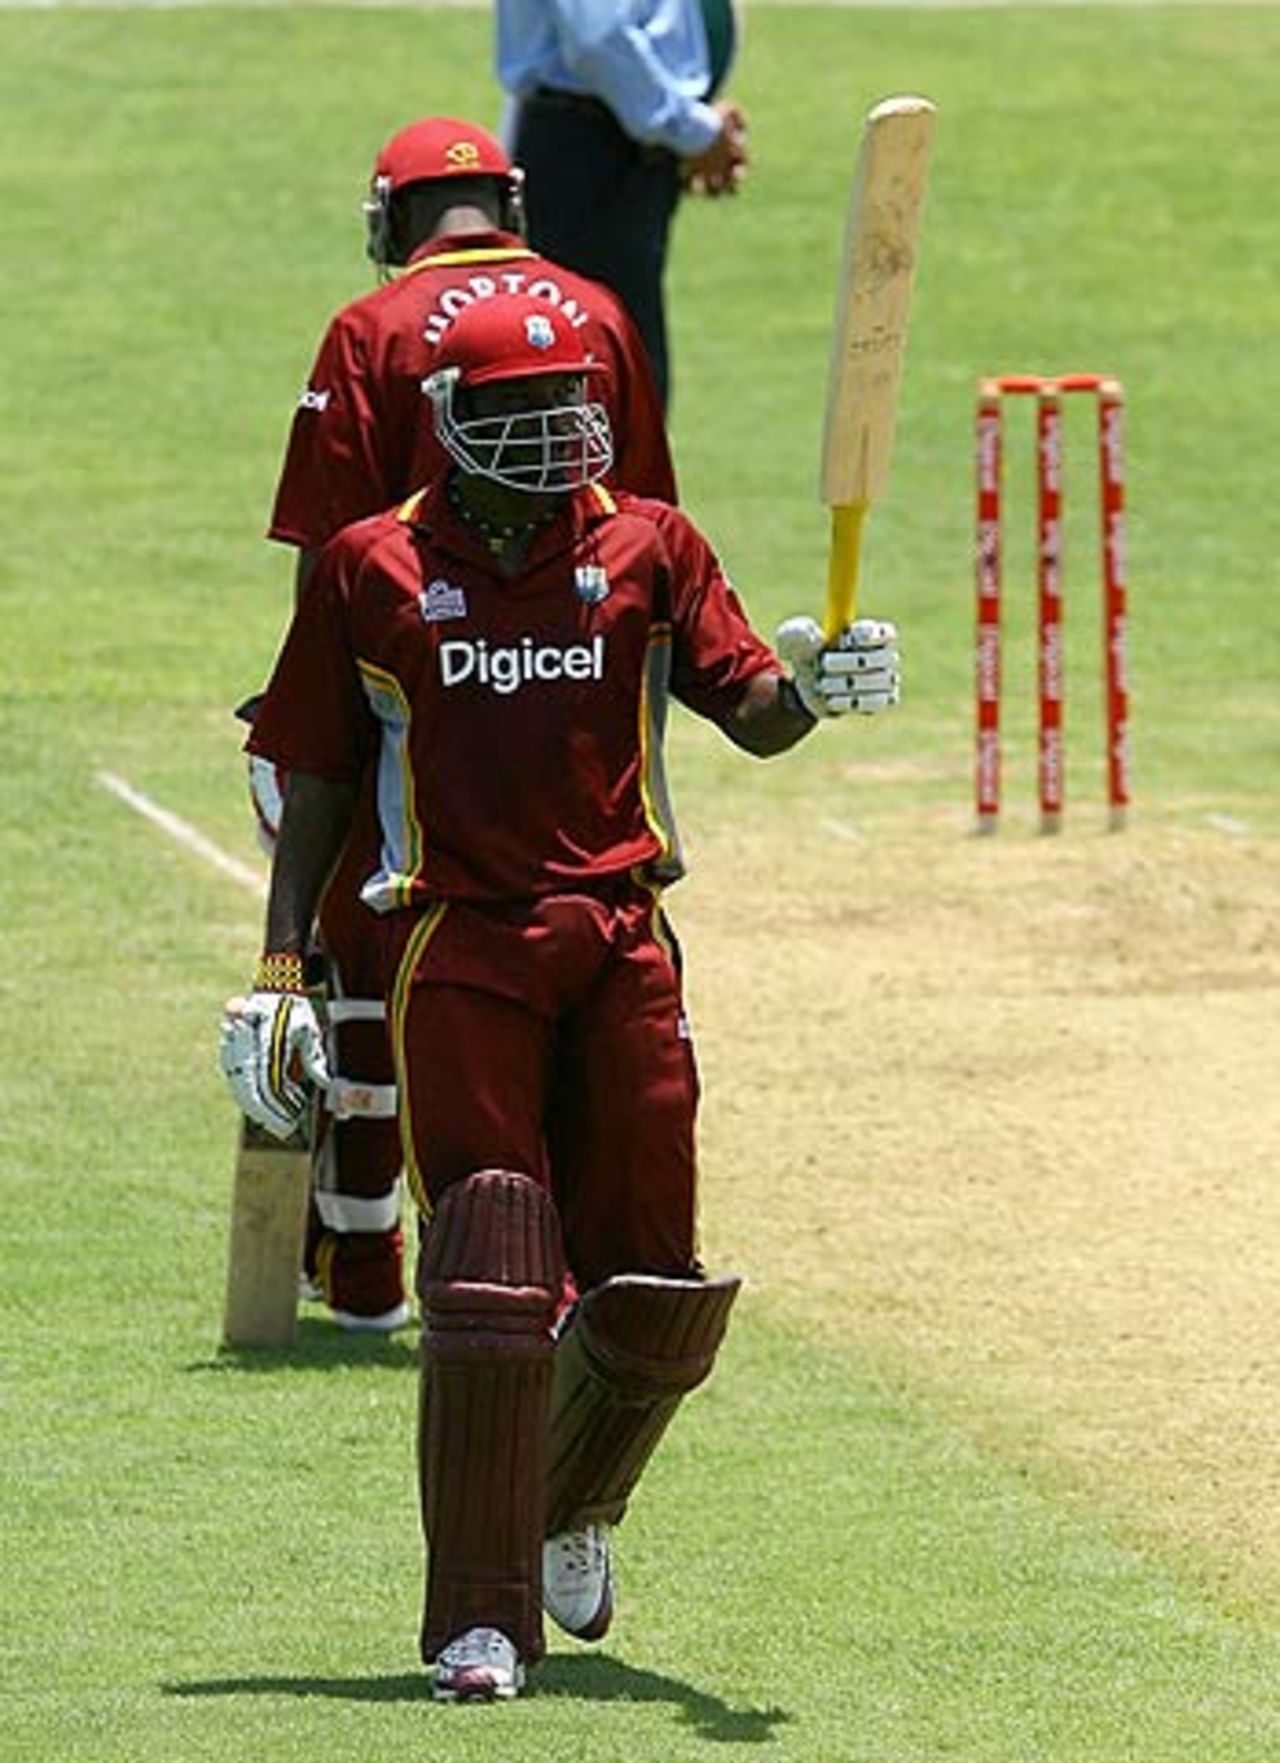 Chris Gayle celebrates a rollicking fifty as West Indies get off to a flier at the Sabina Park, West Indies v India, 1st ODI, Kingston, May 18, 2006